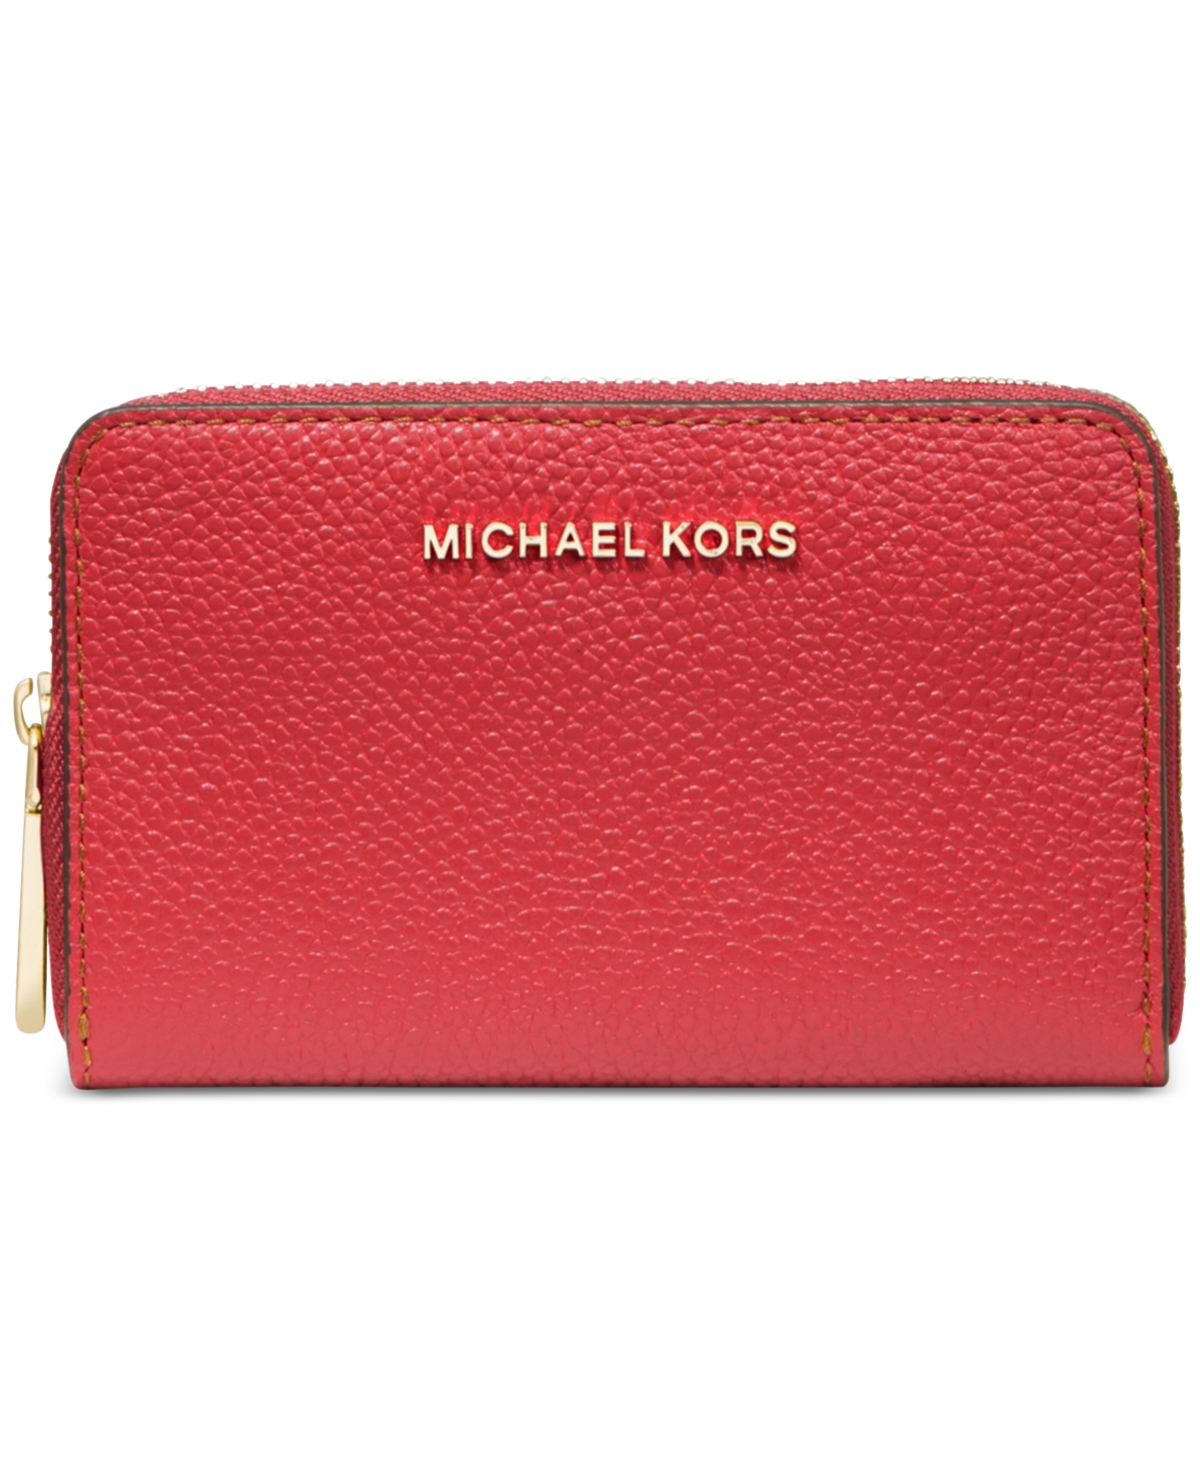 Michael Michael Kors Jet Set Small Zip Around Card Case - Lacquer Red